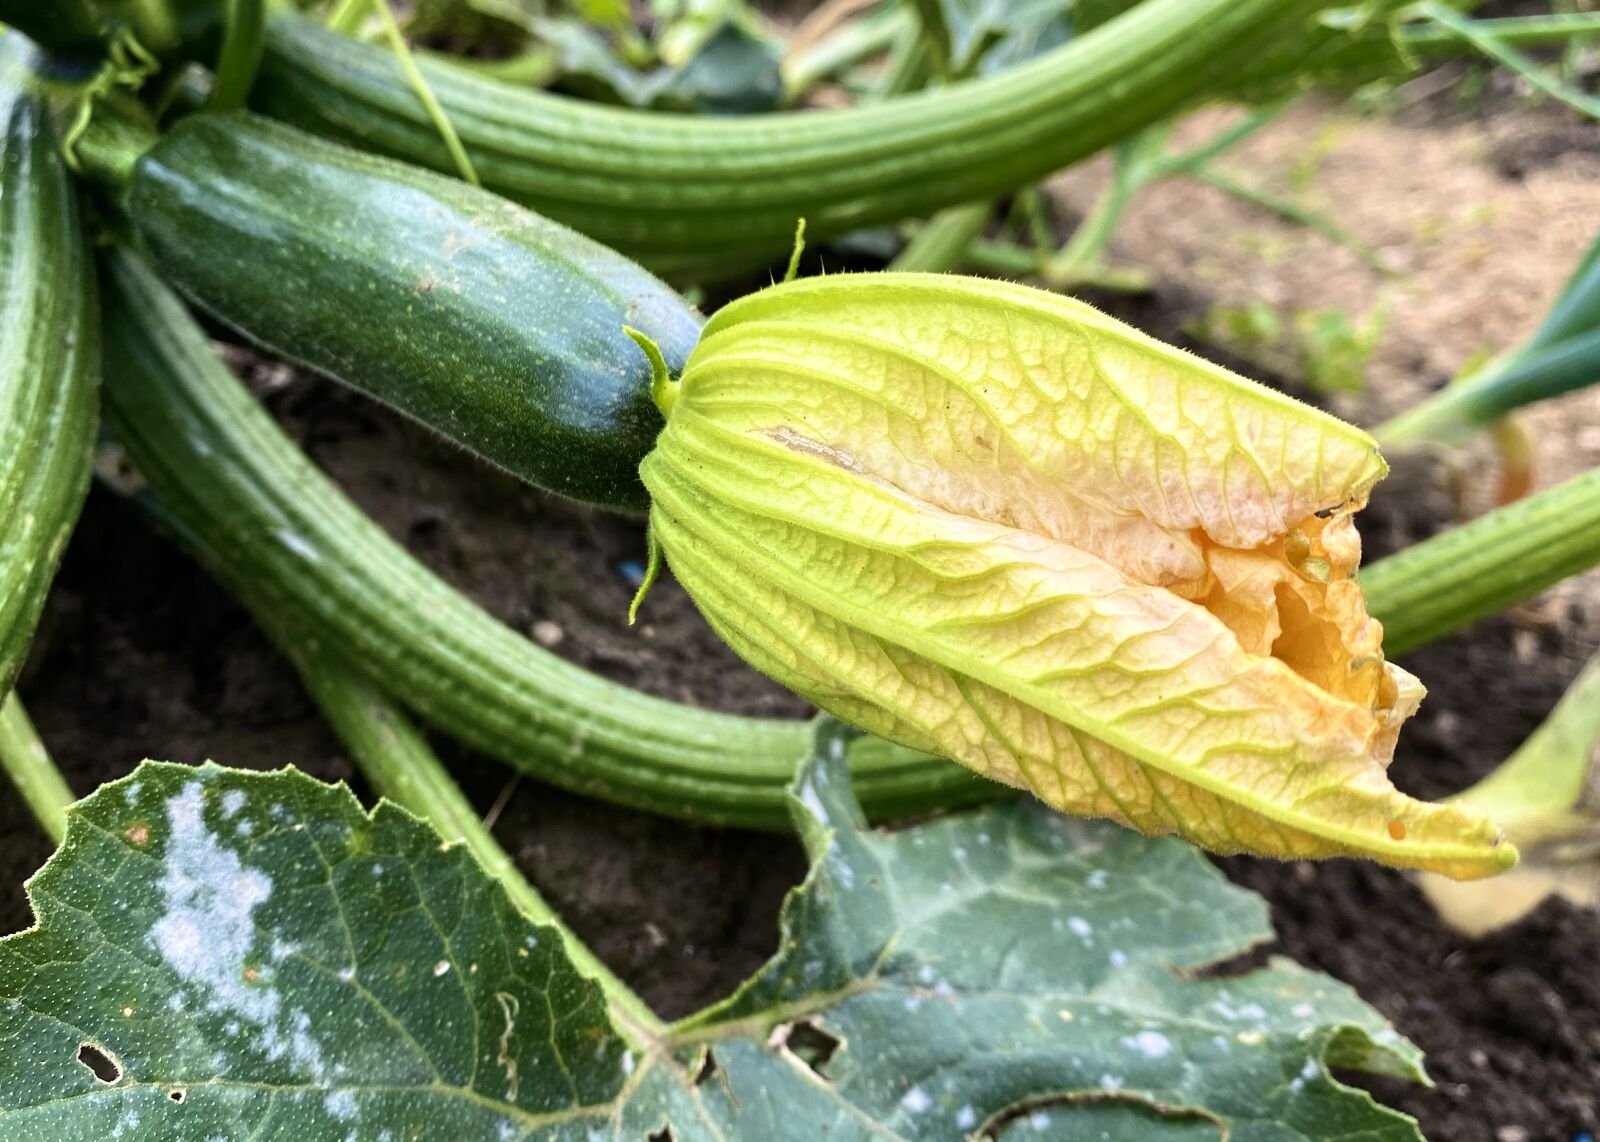 Apple iPhone 11 Pro Max sample photo. Zucchini, vegetables, harvest photography